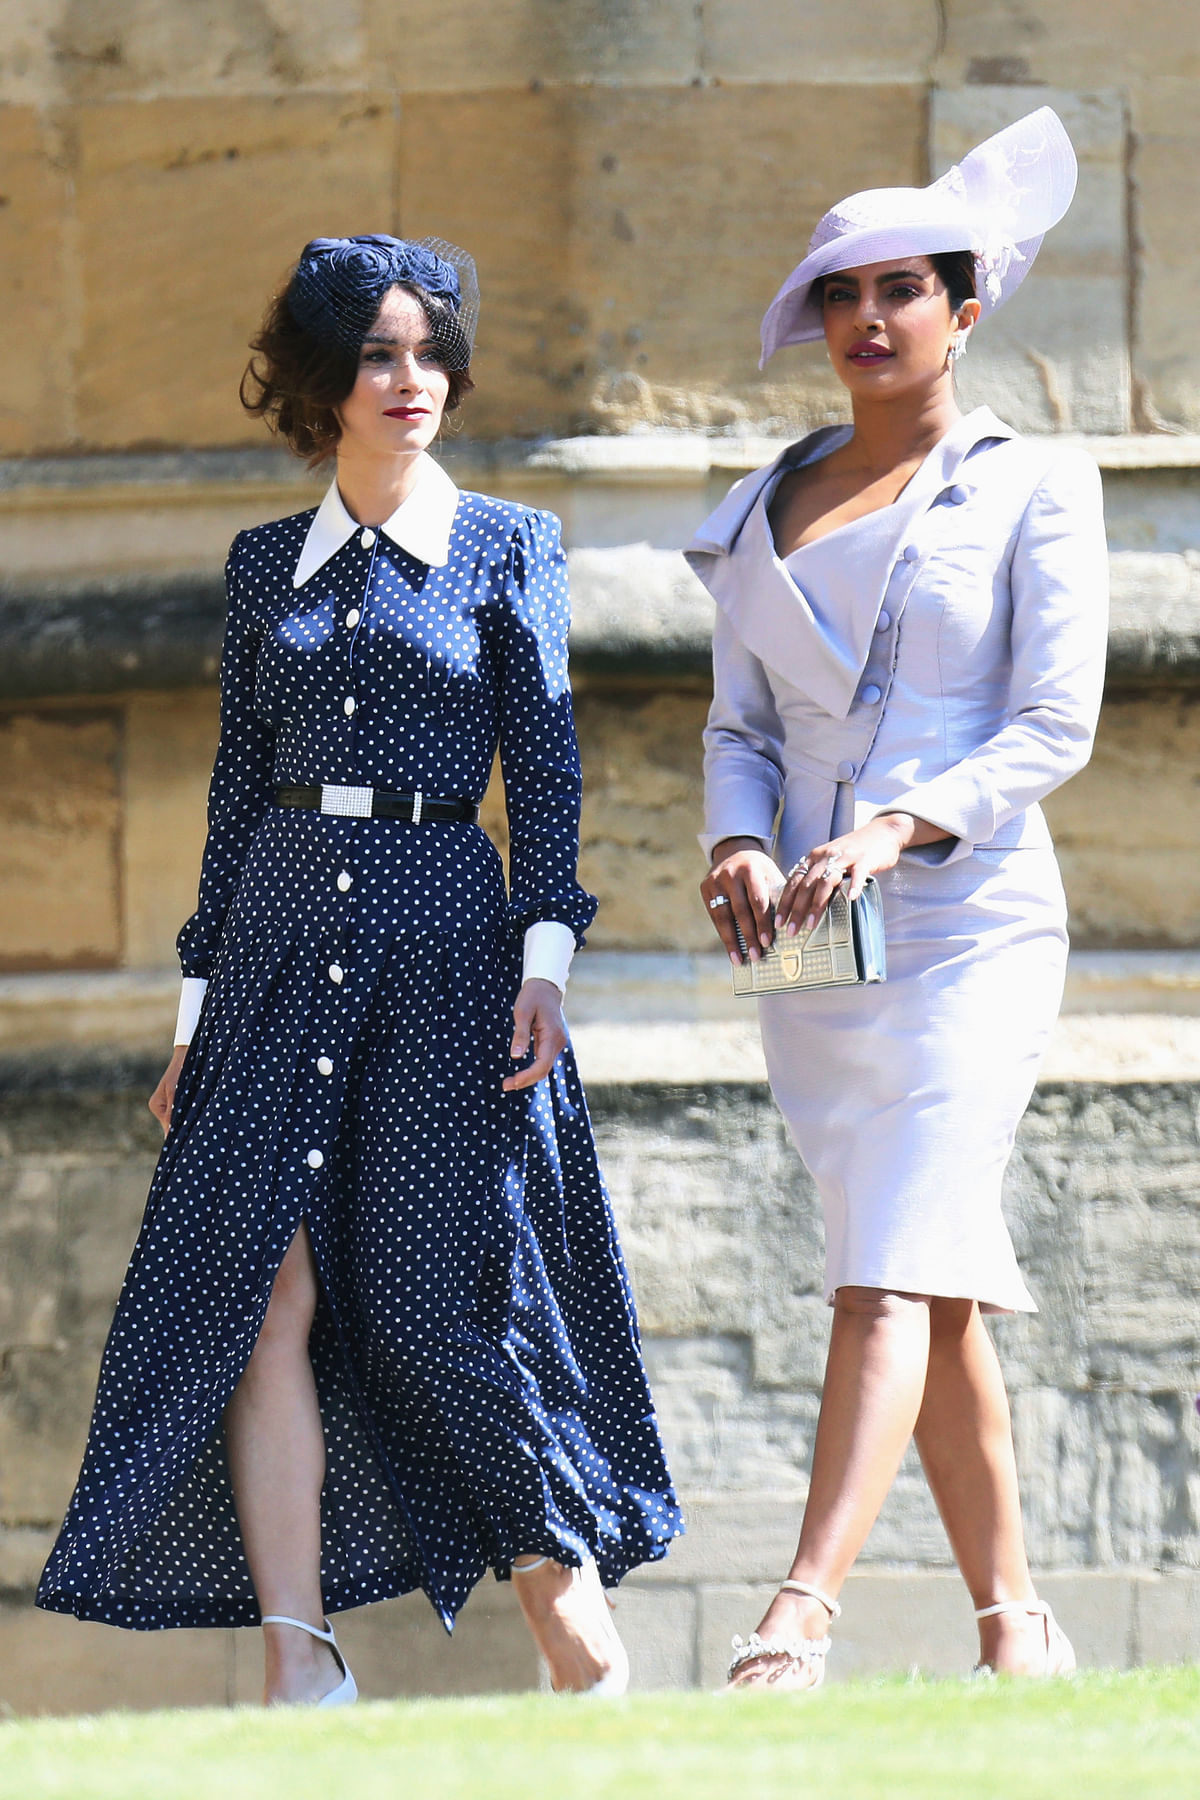 Abigail Spencer and Priyanka Chopra arrive for the wedding ceremony of Prince Harry and Meghan Markle at St George’s Chapel in Windsor Castle in Windsor, near London, England on 19 May. Photo: AP